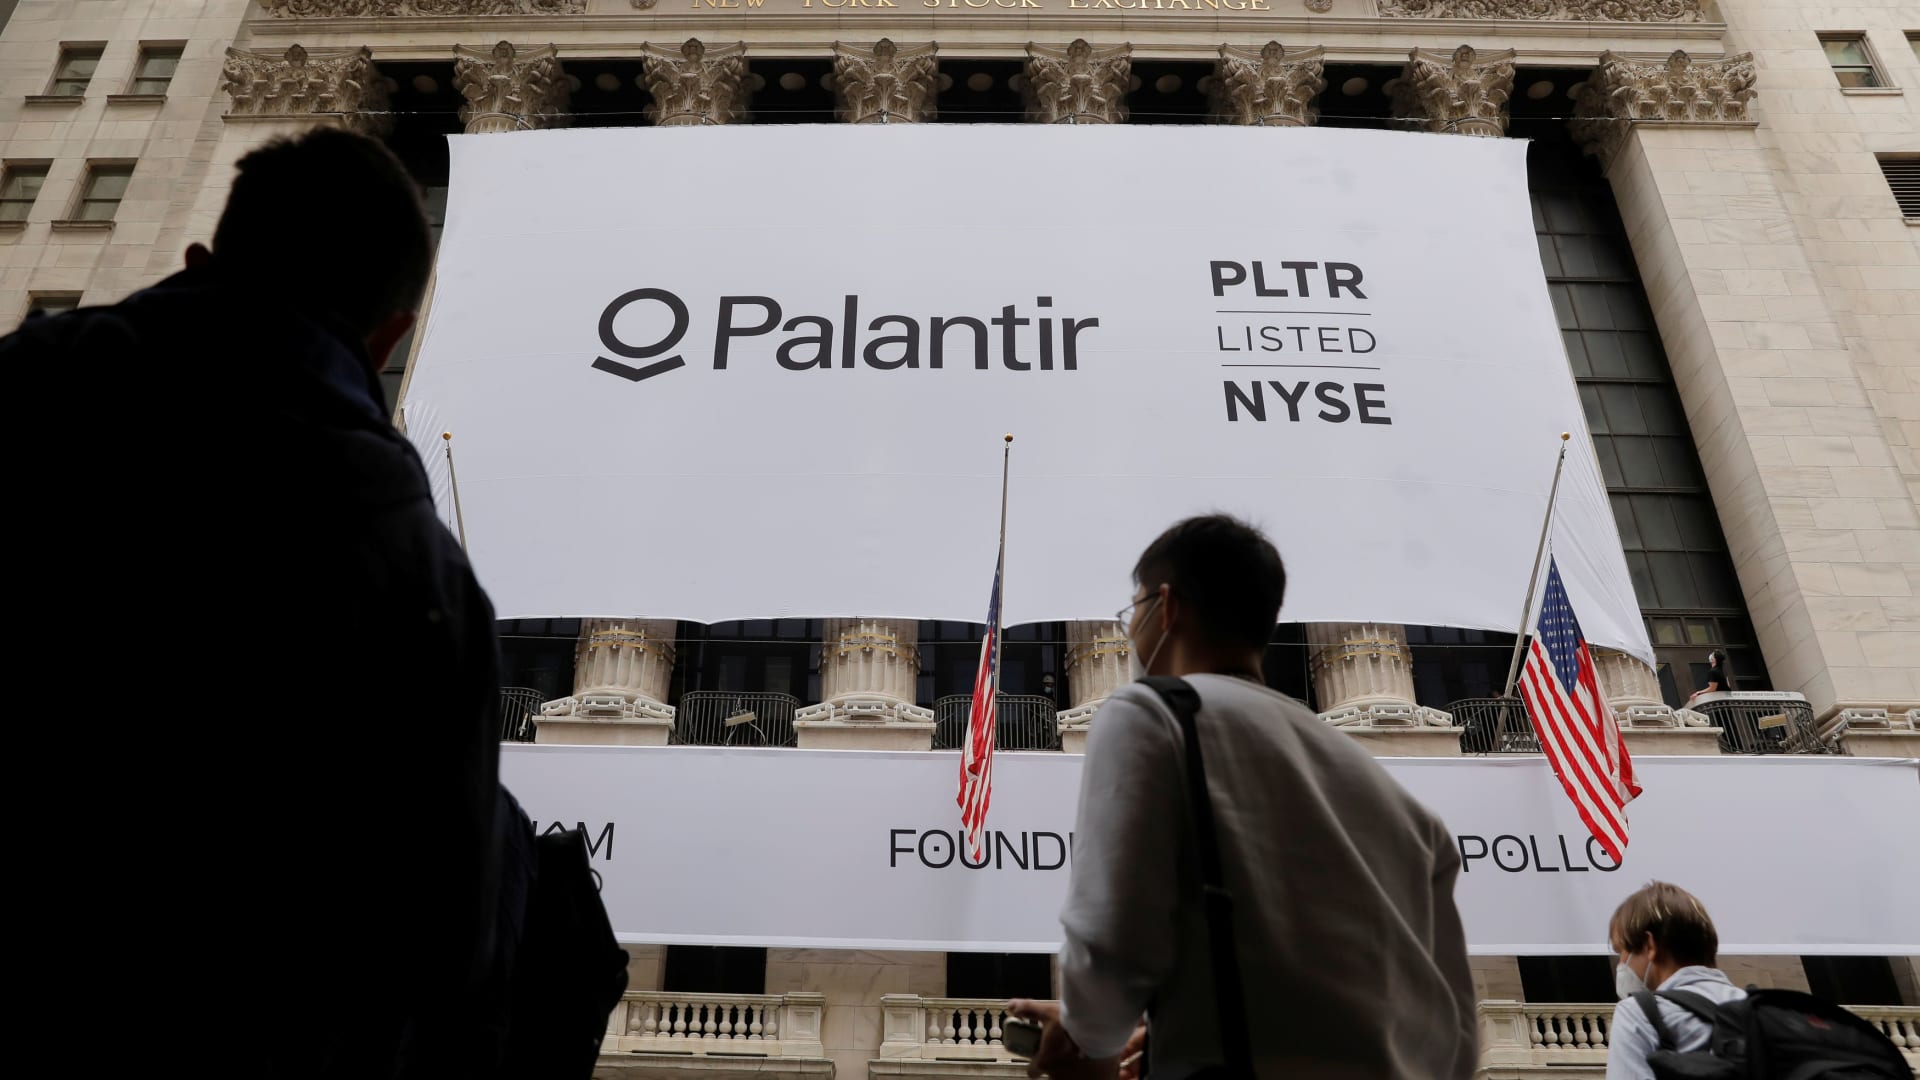 People walk by a banner featuring the logo of Palantir Technologies (PLTR) at the New York Stock Exchange (NYSE) on the day of their initial public offering (IPO) in Manhattan, New York City, U.S., September 30, 2020.